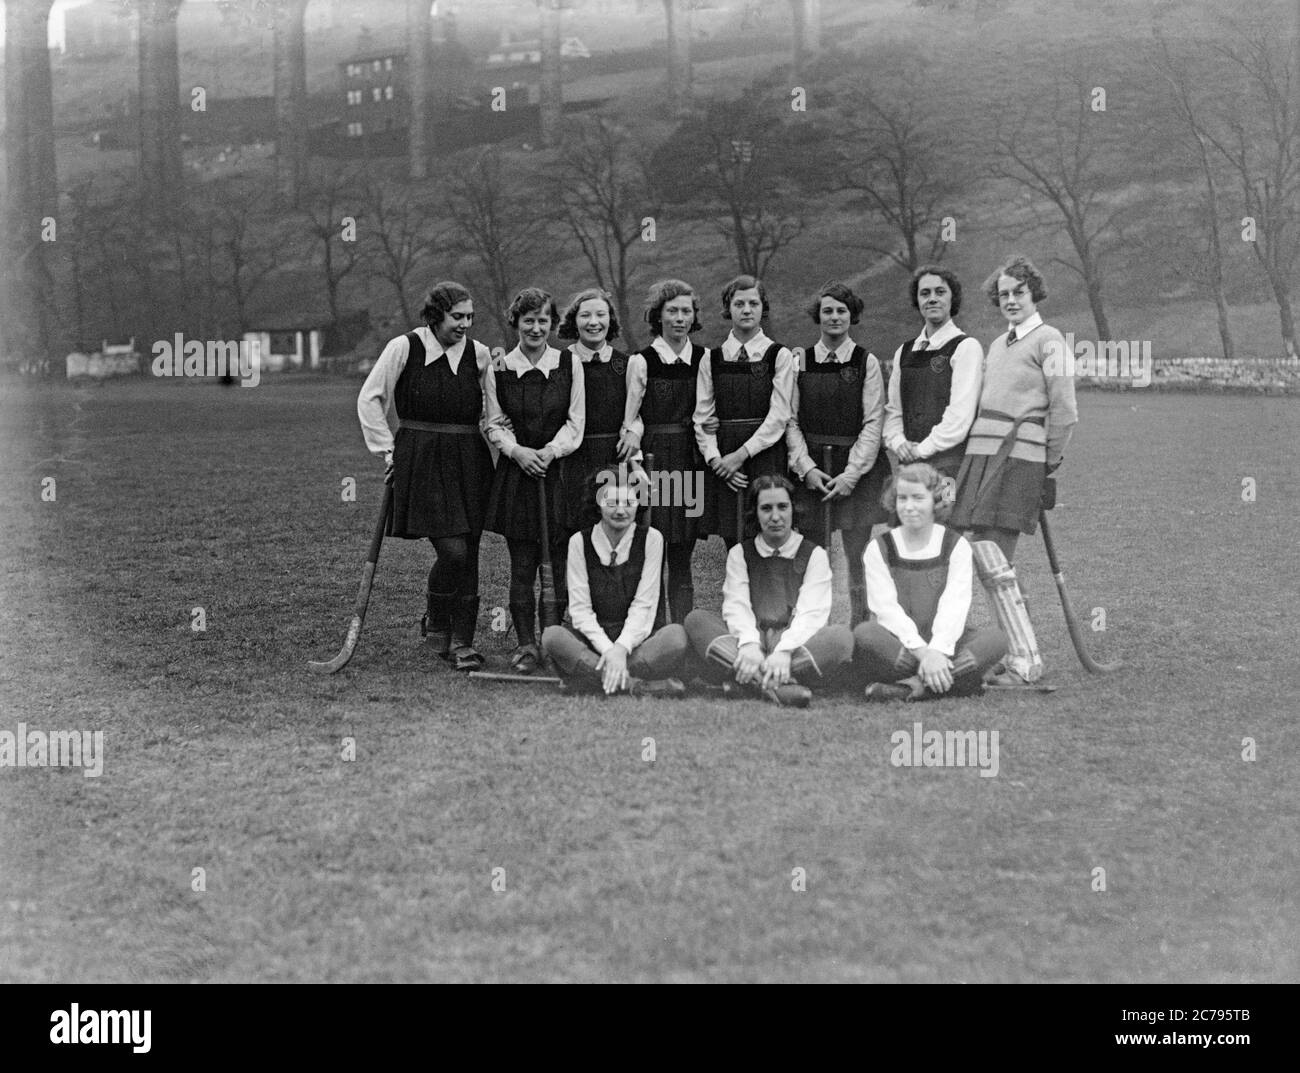 Vintage photograph taken in 1931 showing the Huddersfield Ladies Hockey Team in England. Stock Photo